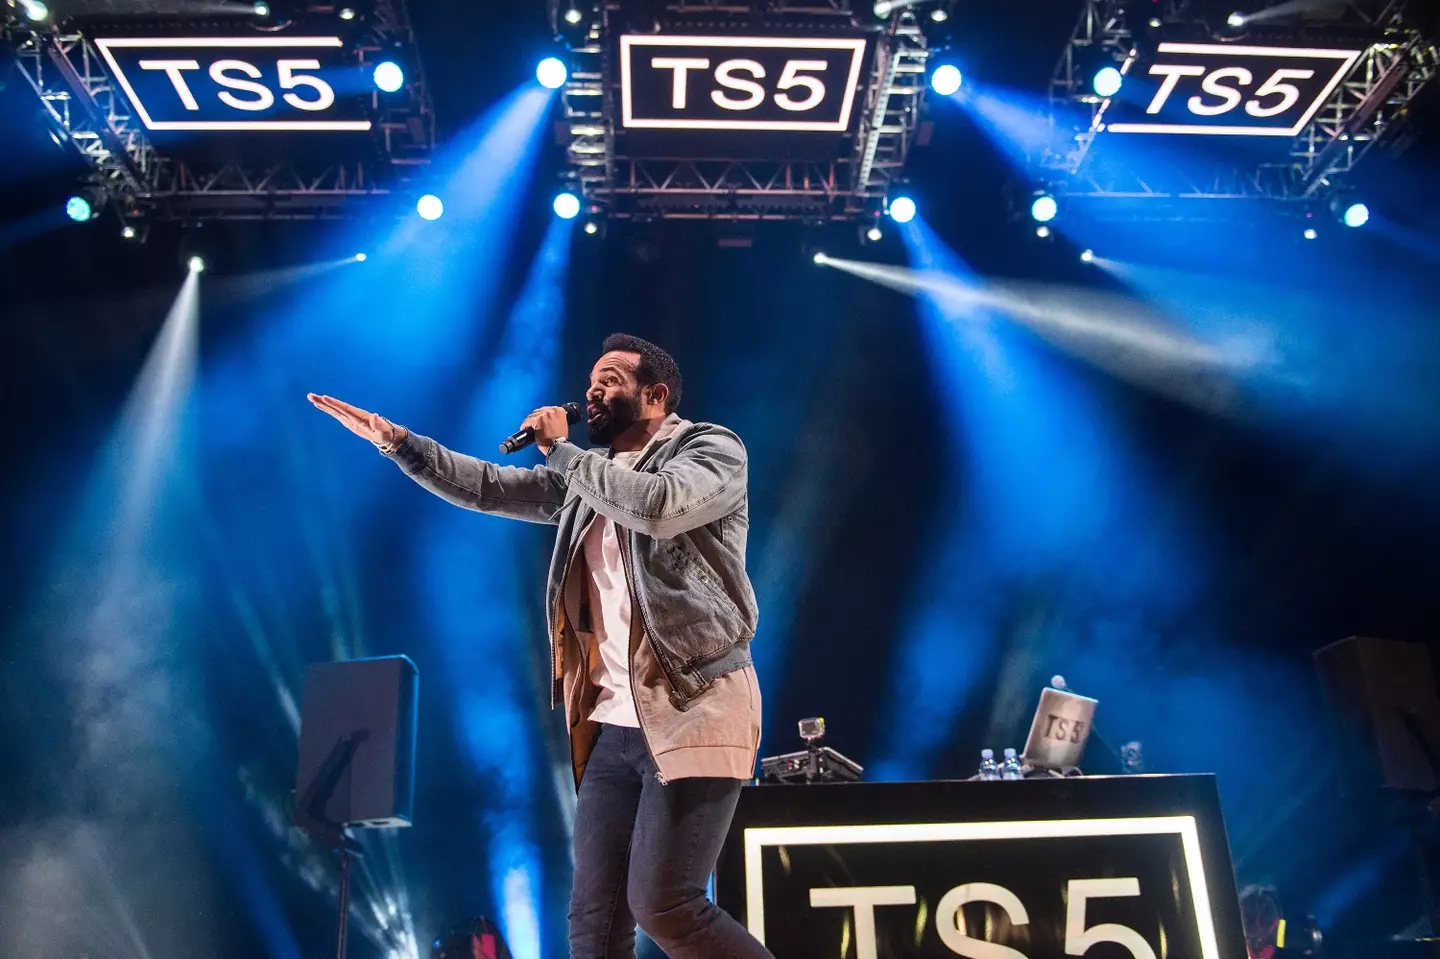 TS5 Festival is coming.